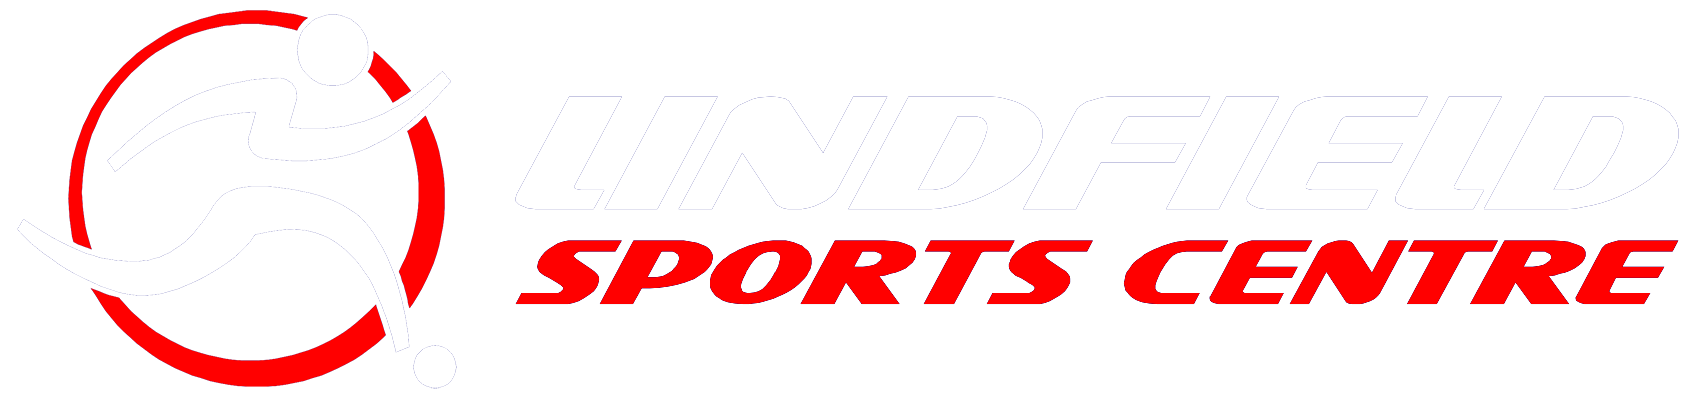 Lindfield Sports Centre logo